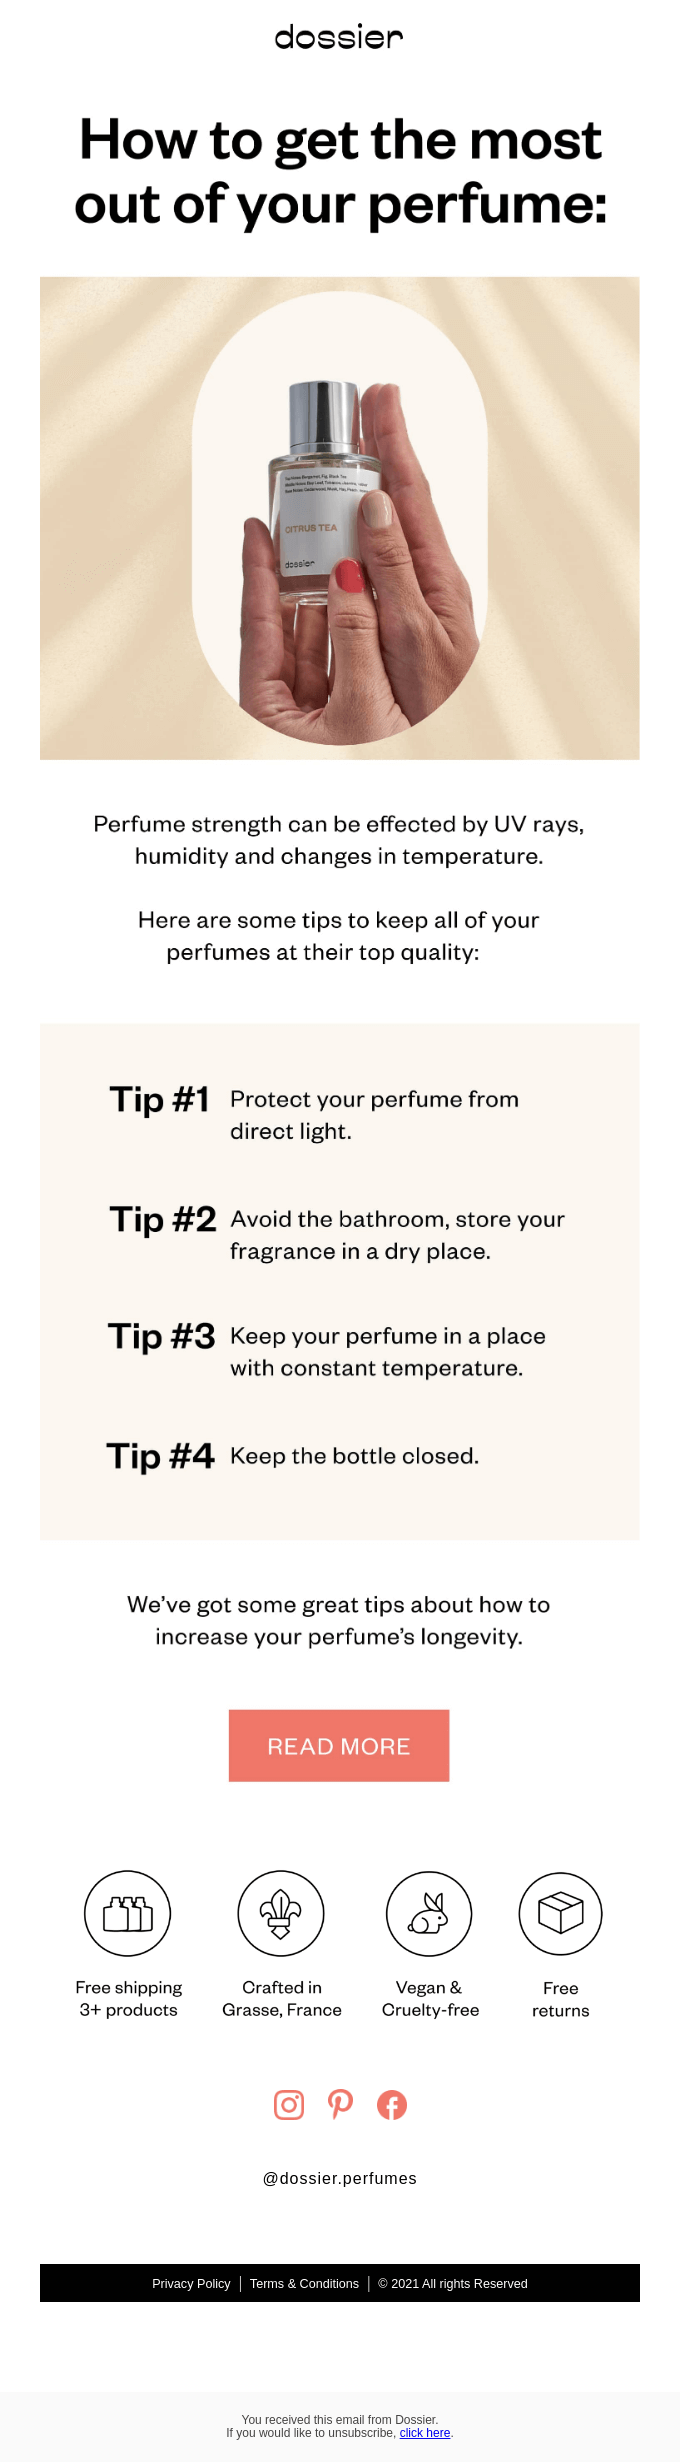 Tips: How to preserve your perfume?